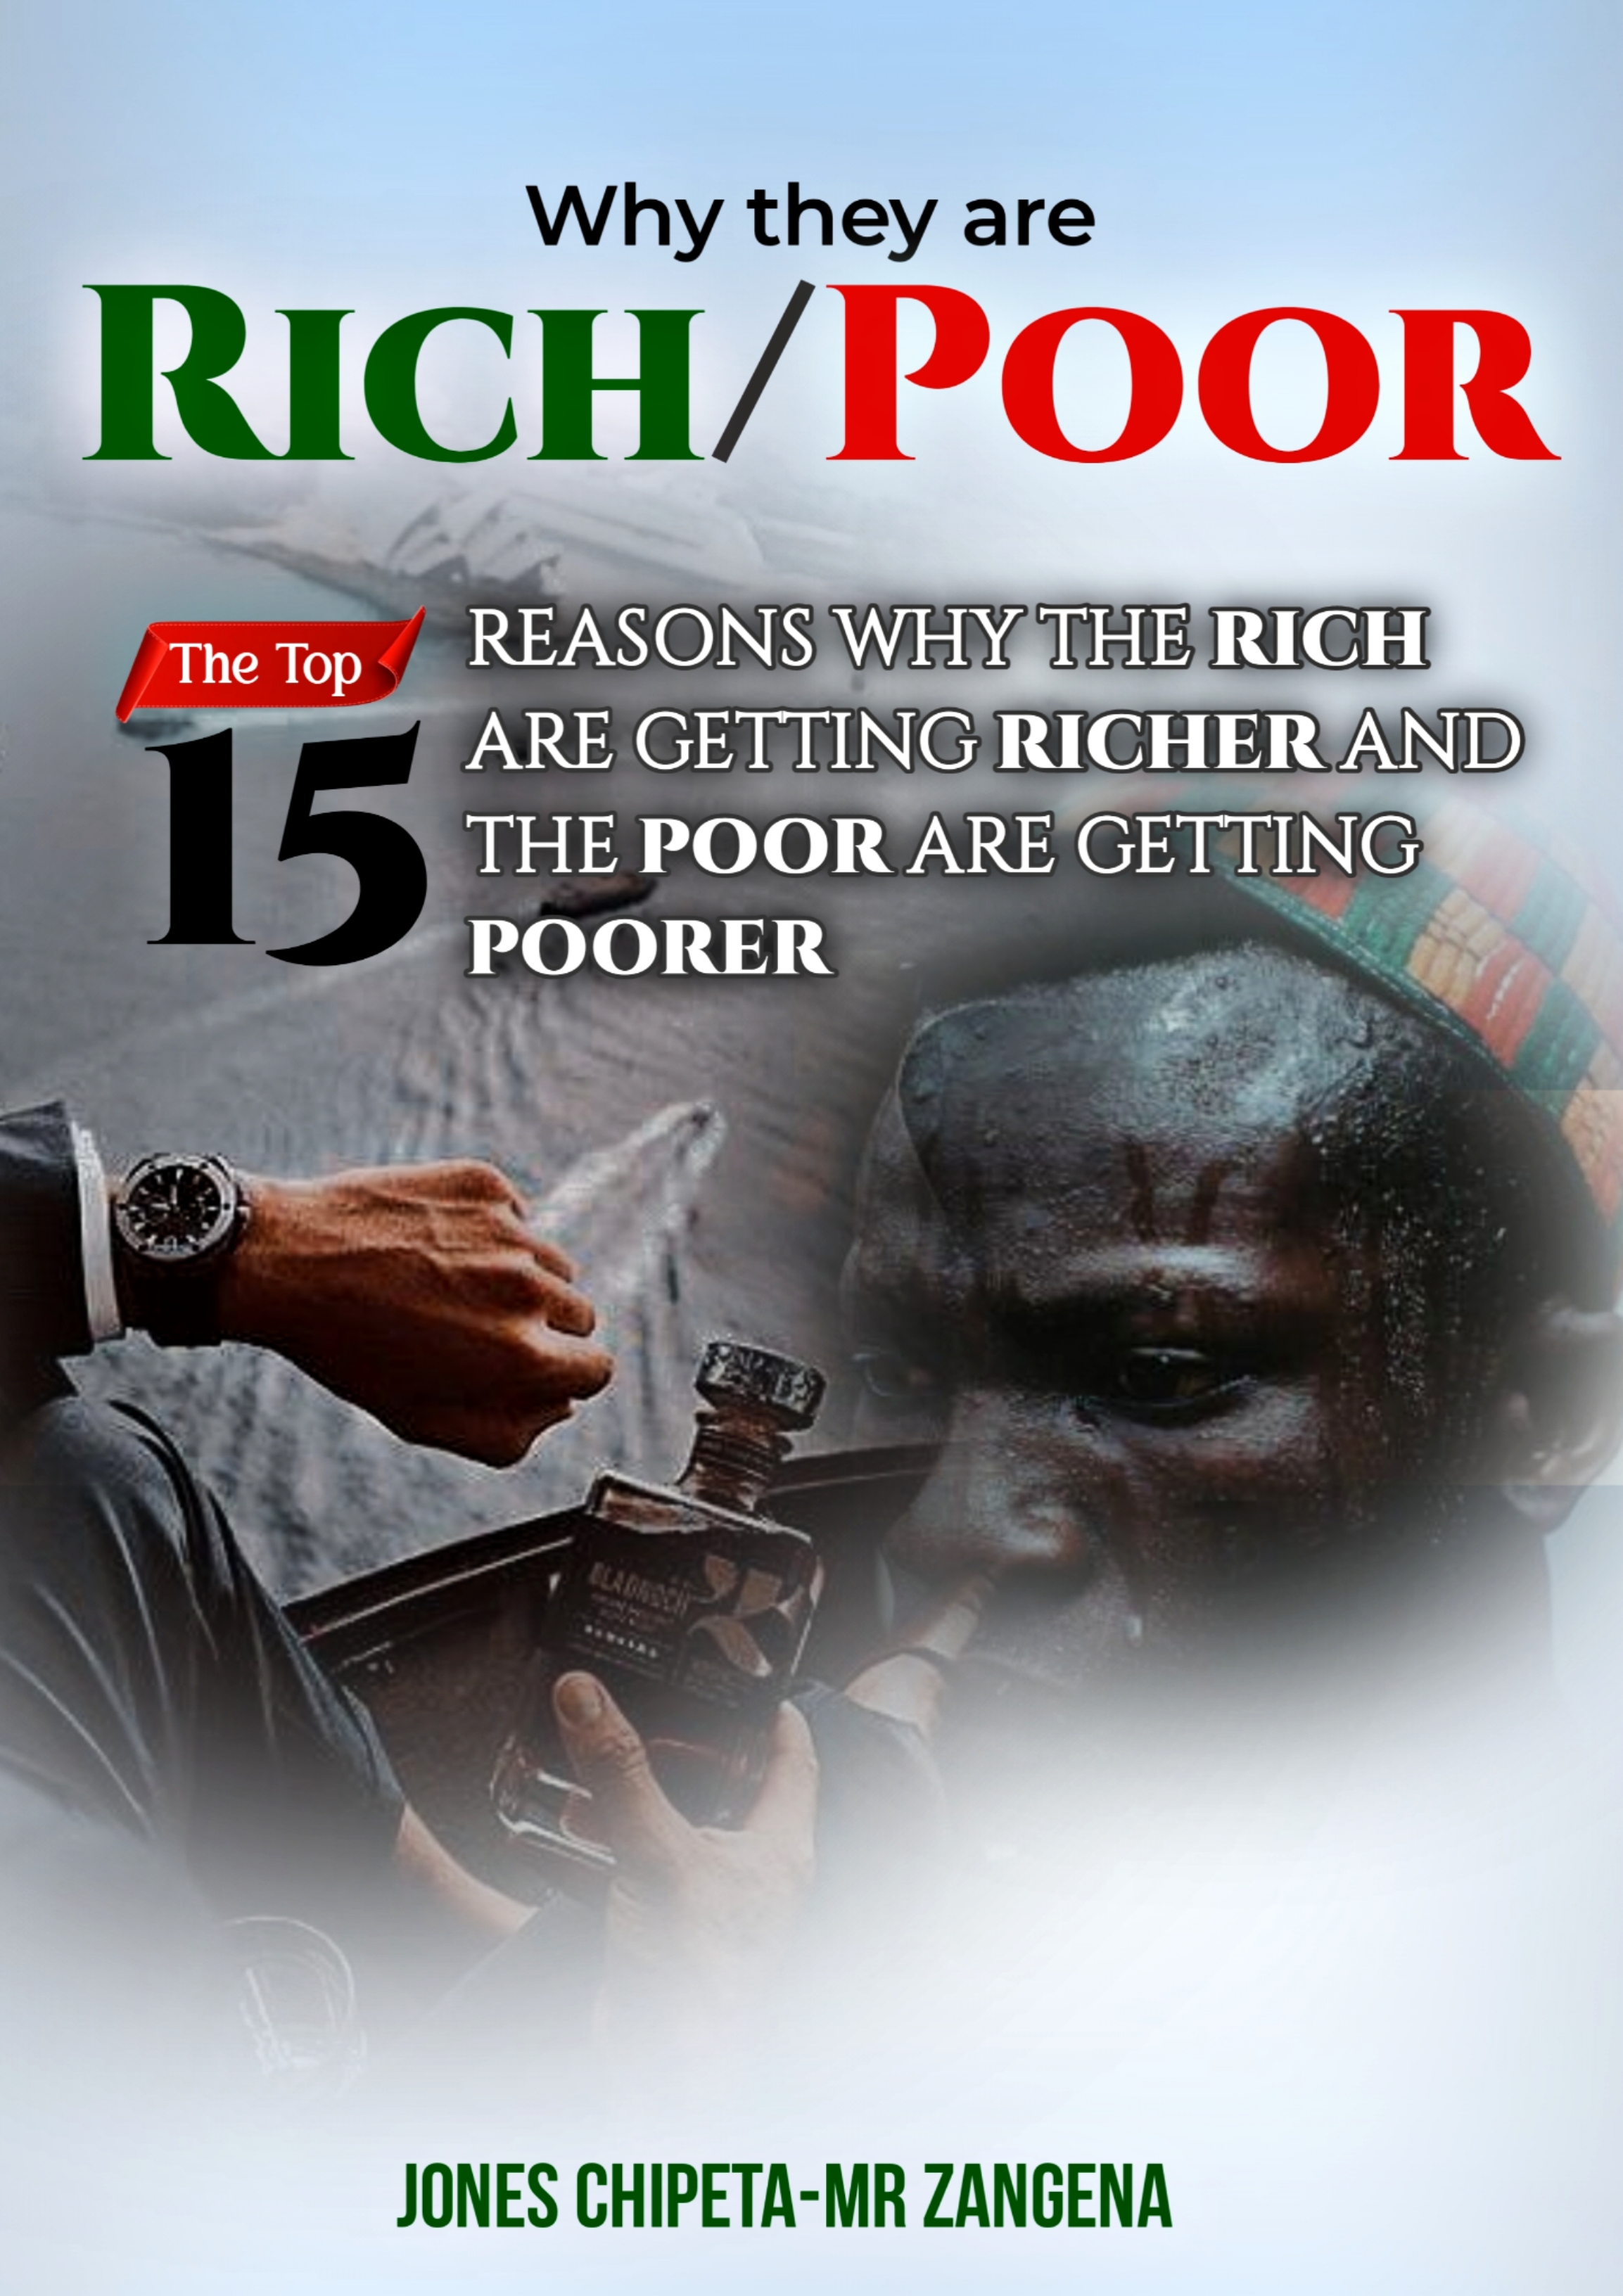 Why they are RICH/POOR eBook